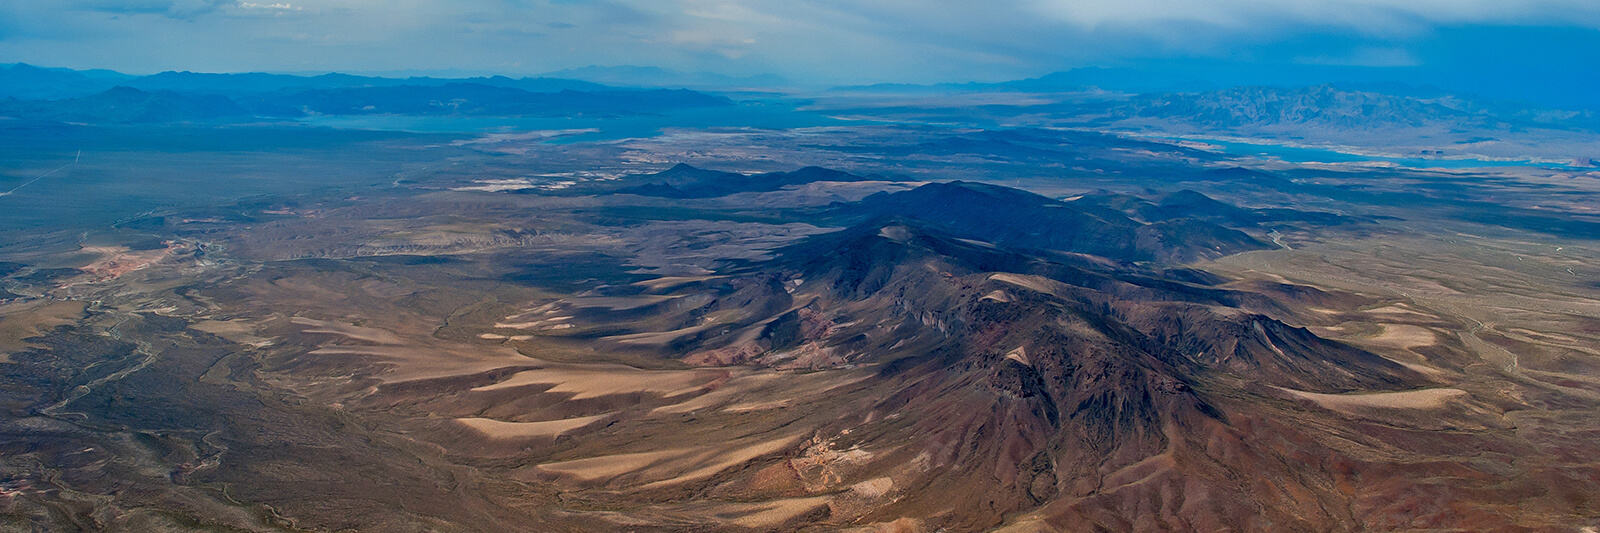 mountain aerial view of nevada